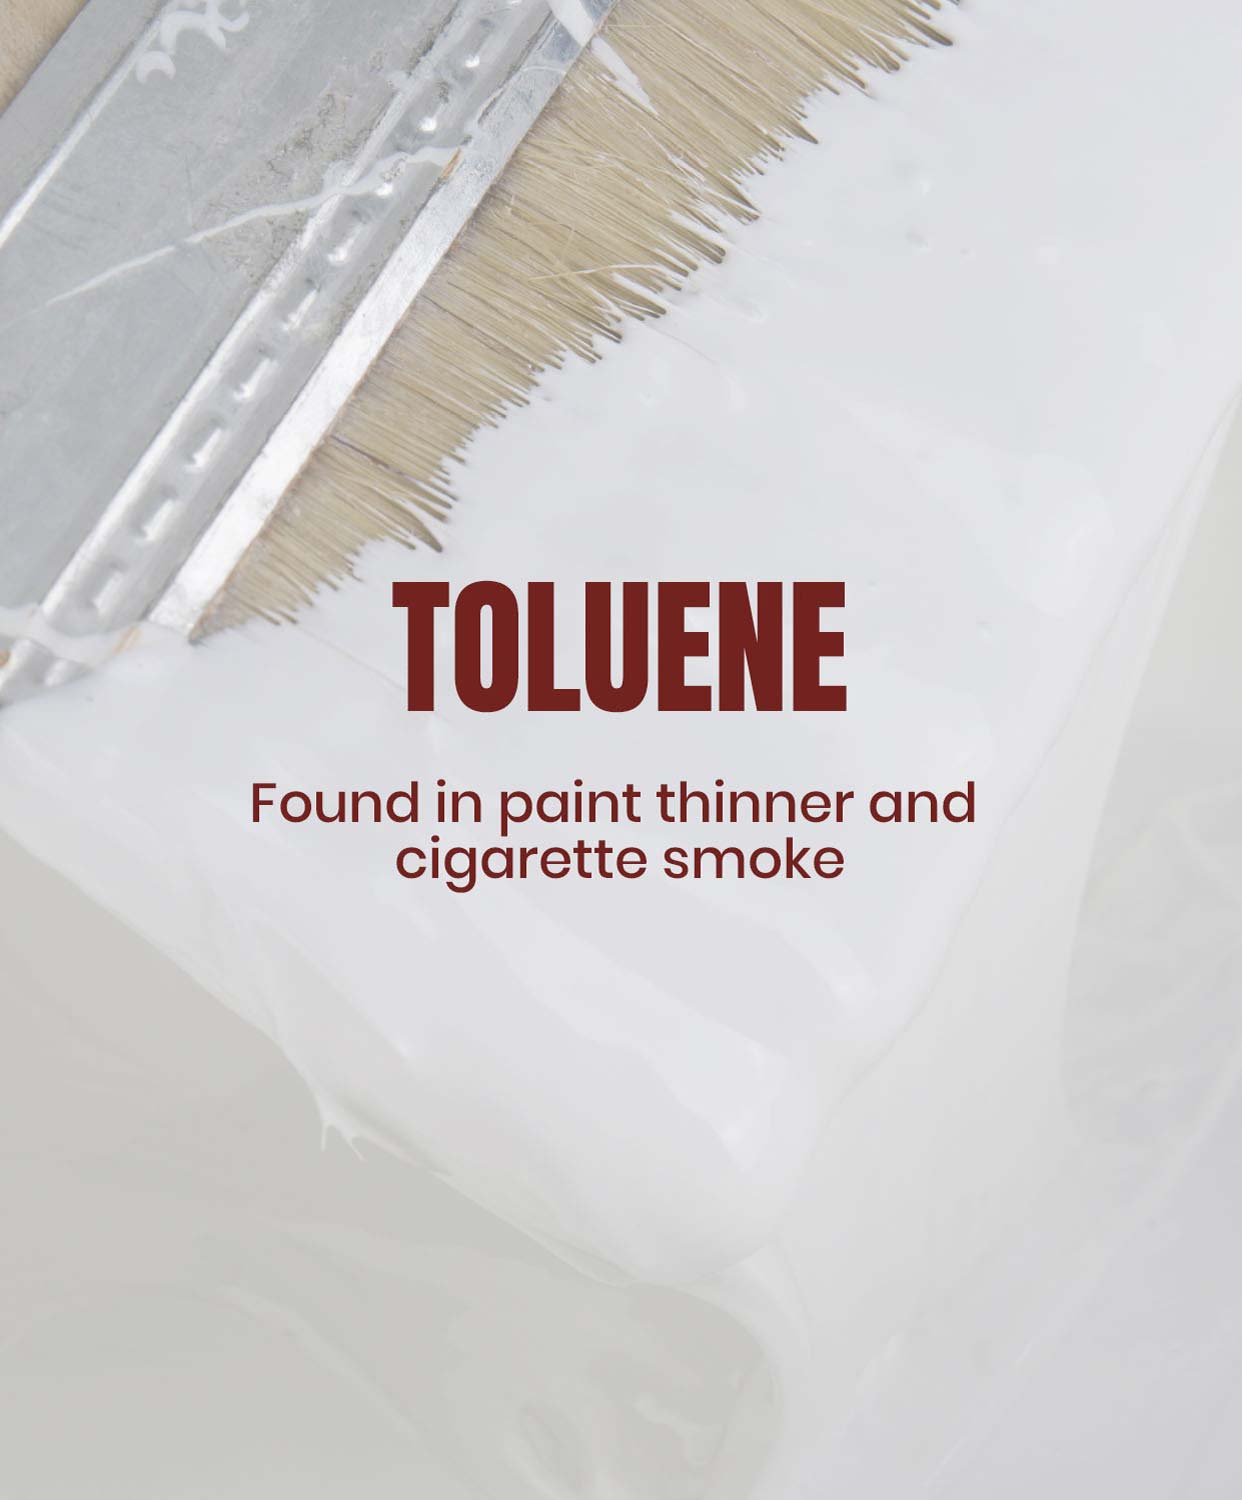 Toluene. Found in paint thinner and cigarette smoke.